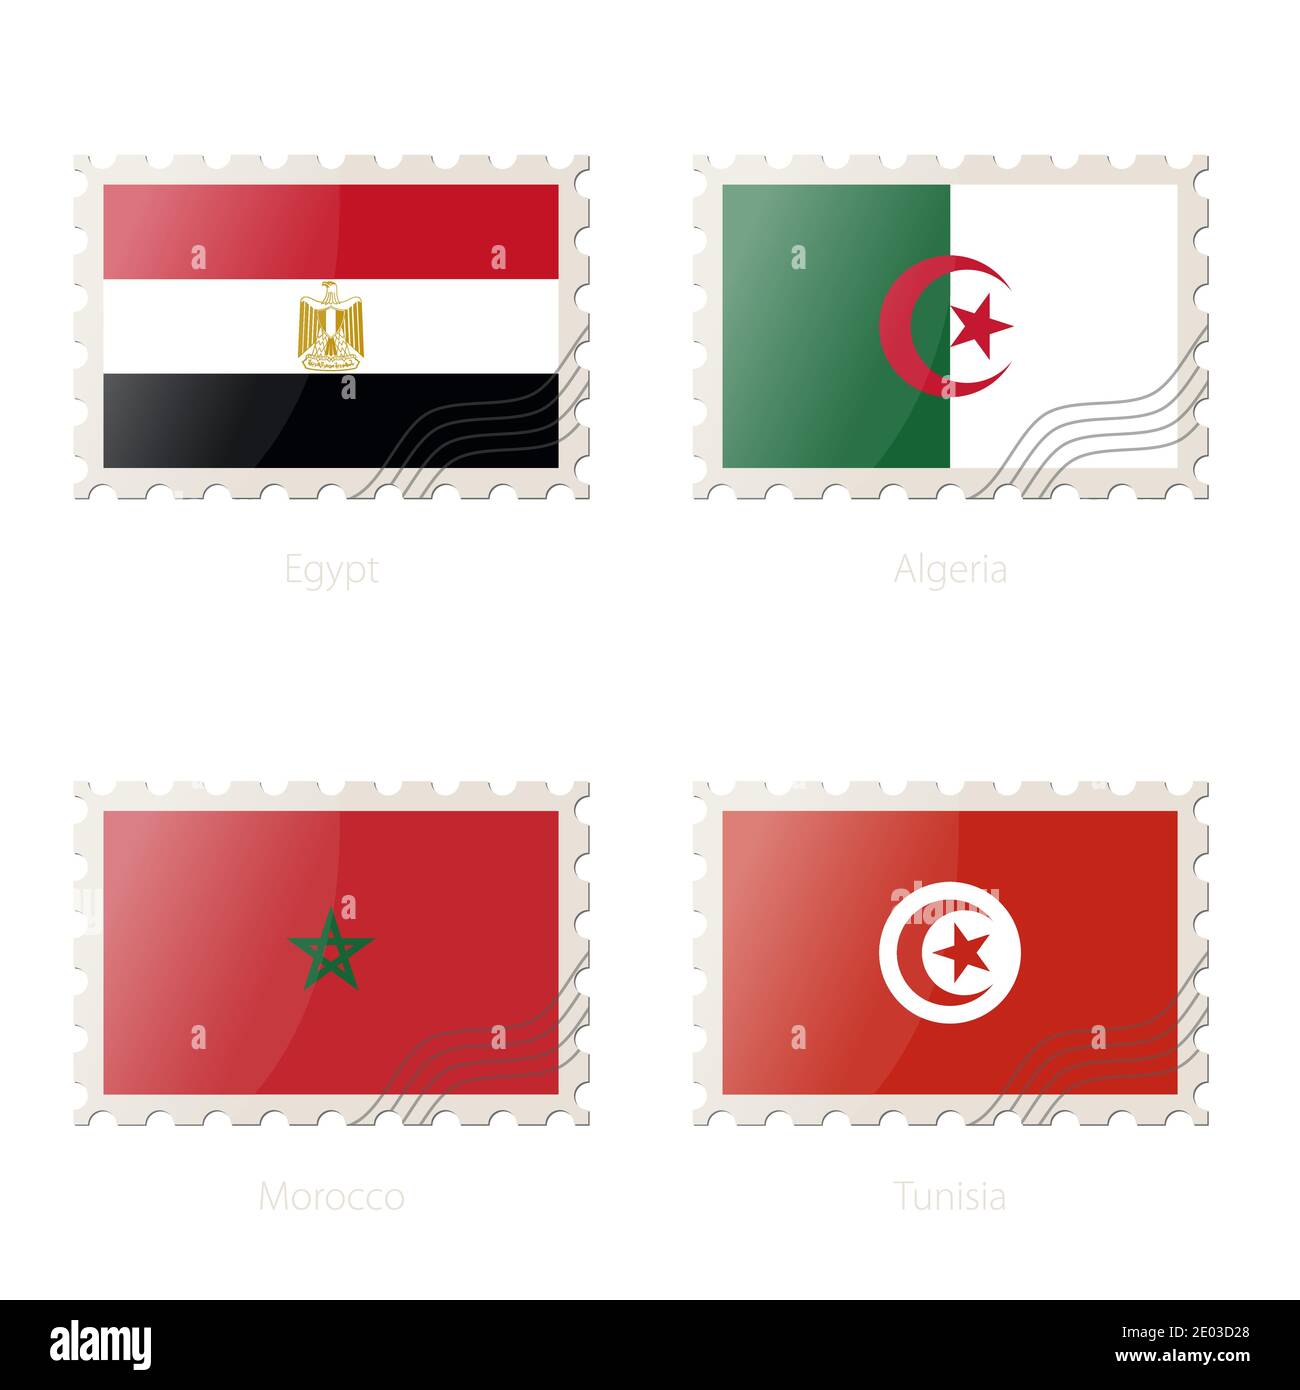 Postage stamp with the image of Egypt, Algeria, Morocco, Tunisia flag. Vector Illustration. Stock Vector